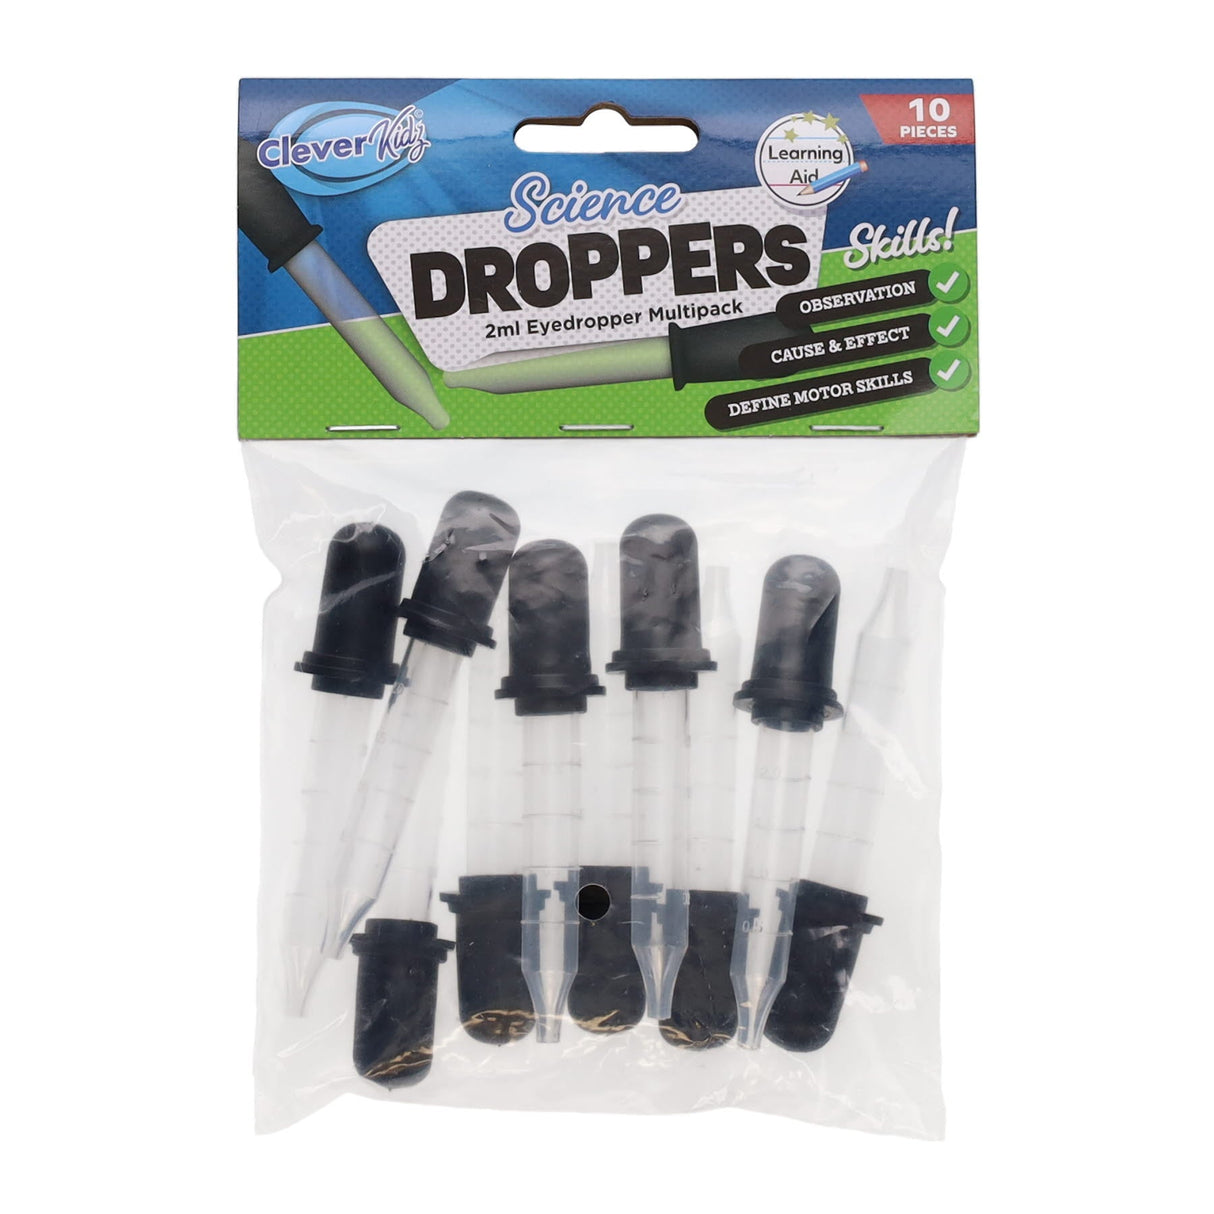 Clever Kidz Science Droppers - 10 pieces | Stationery Shop UK